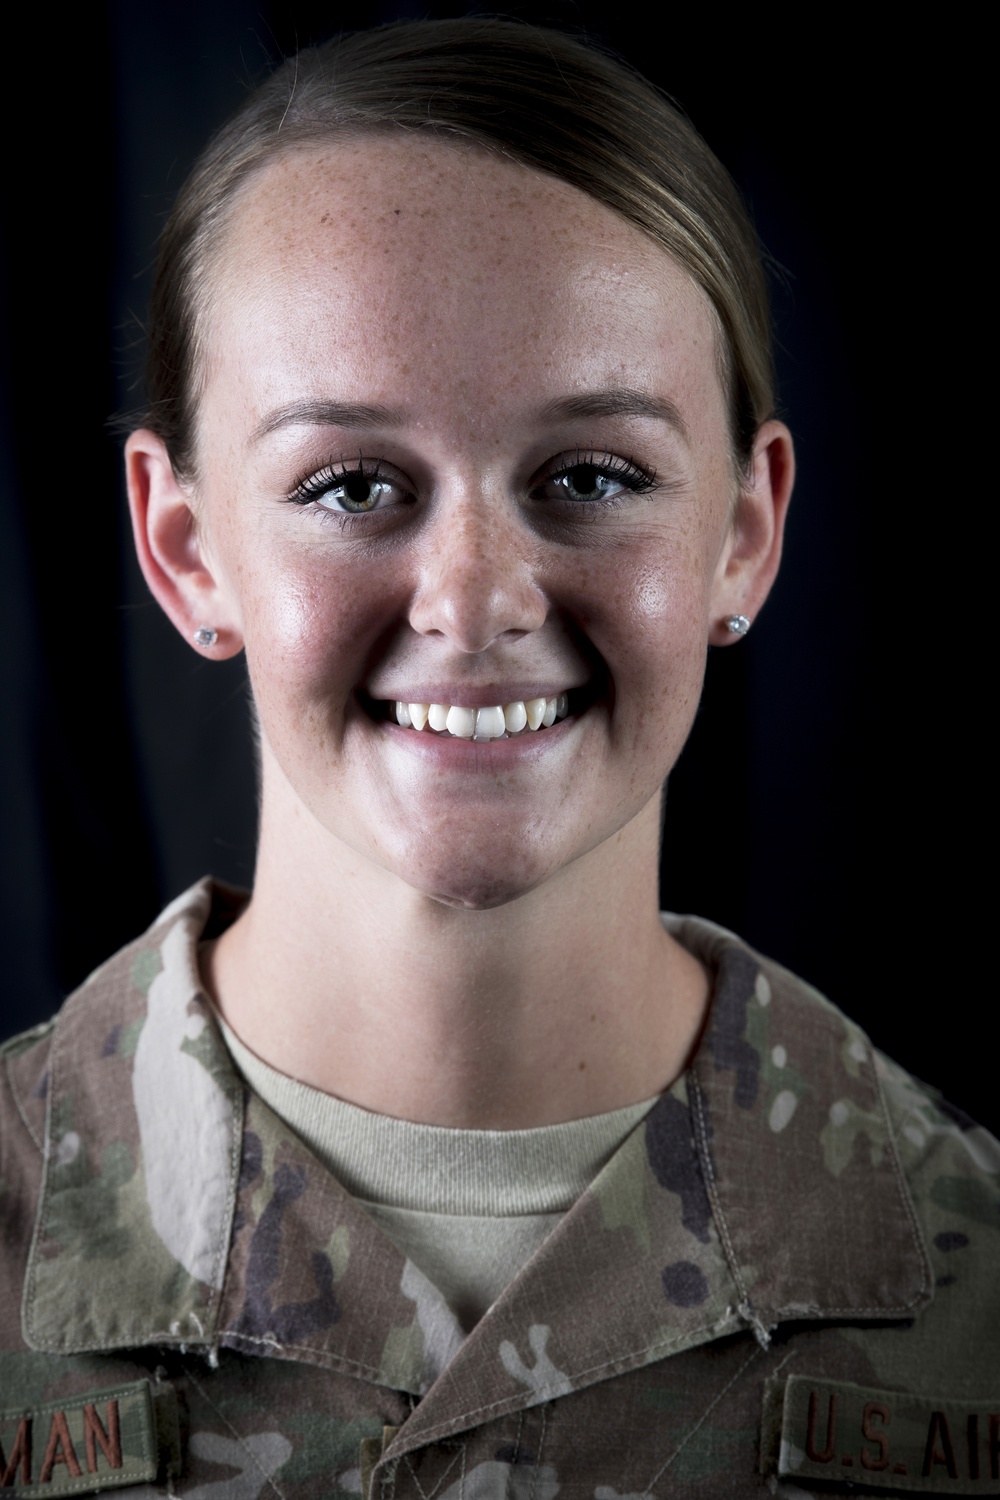 I wanted to serve - Airman Kathryn Eddleman